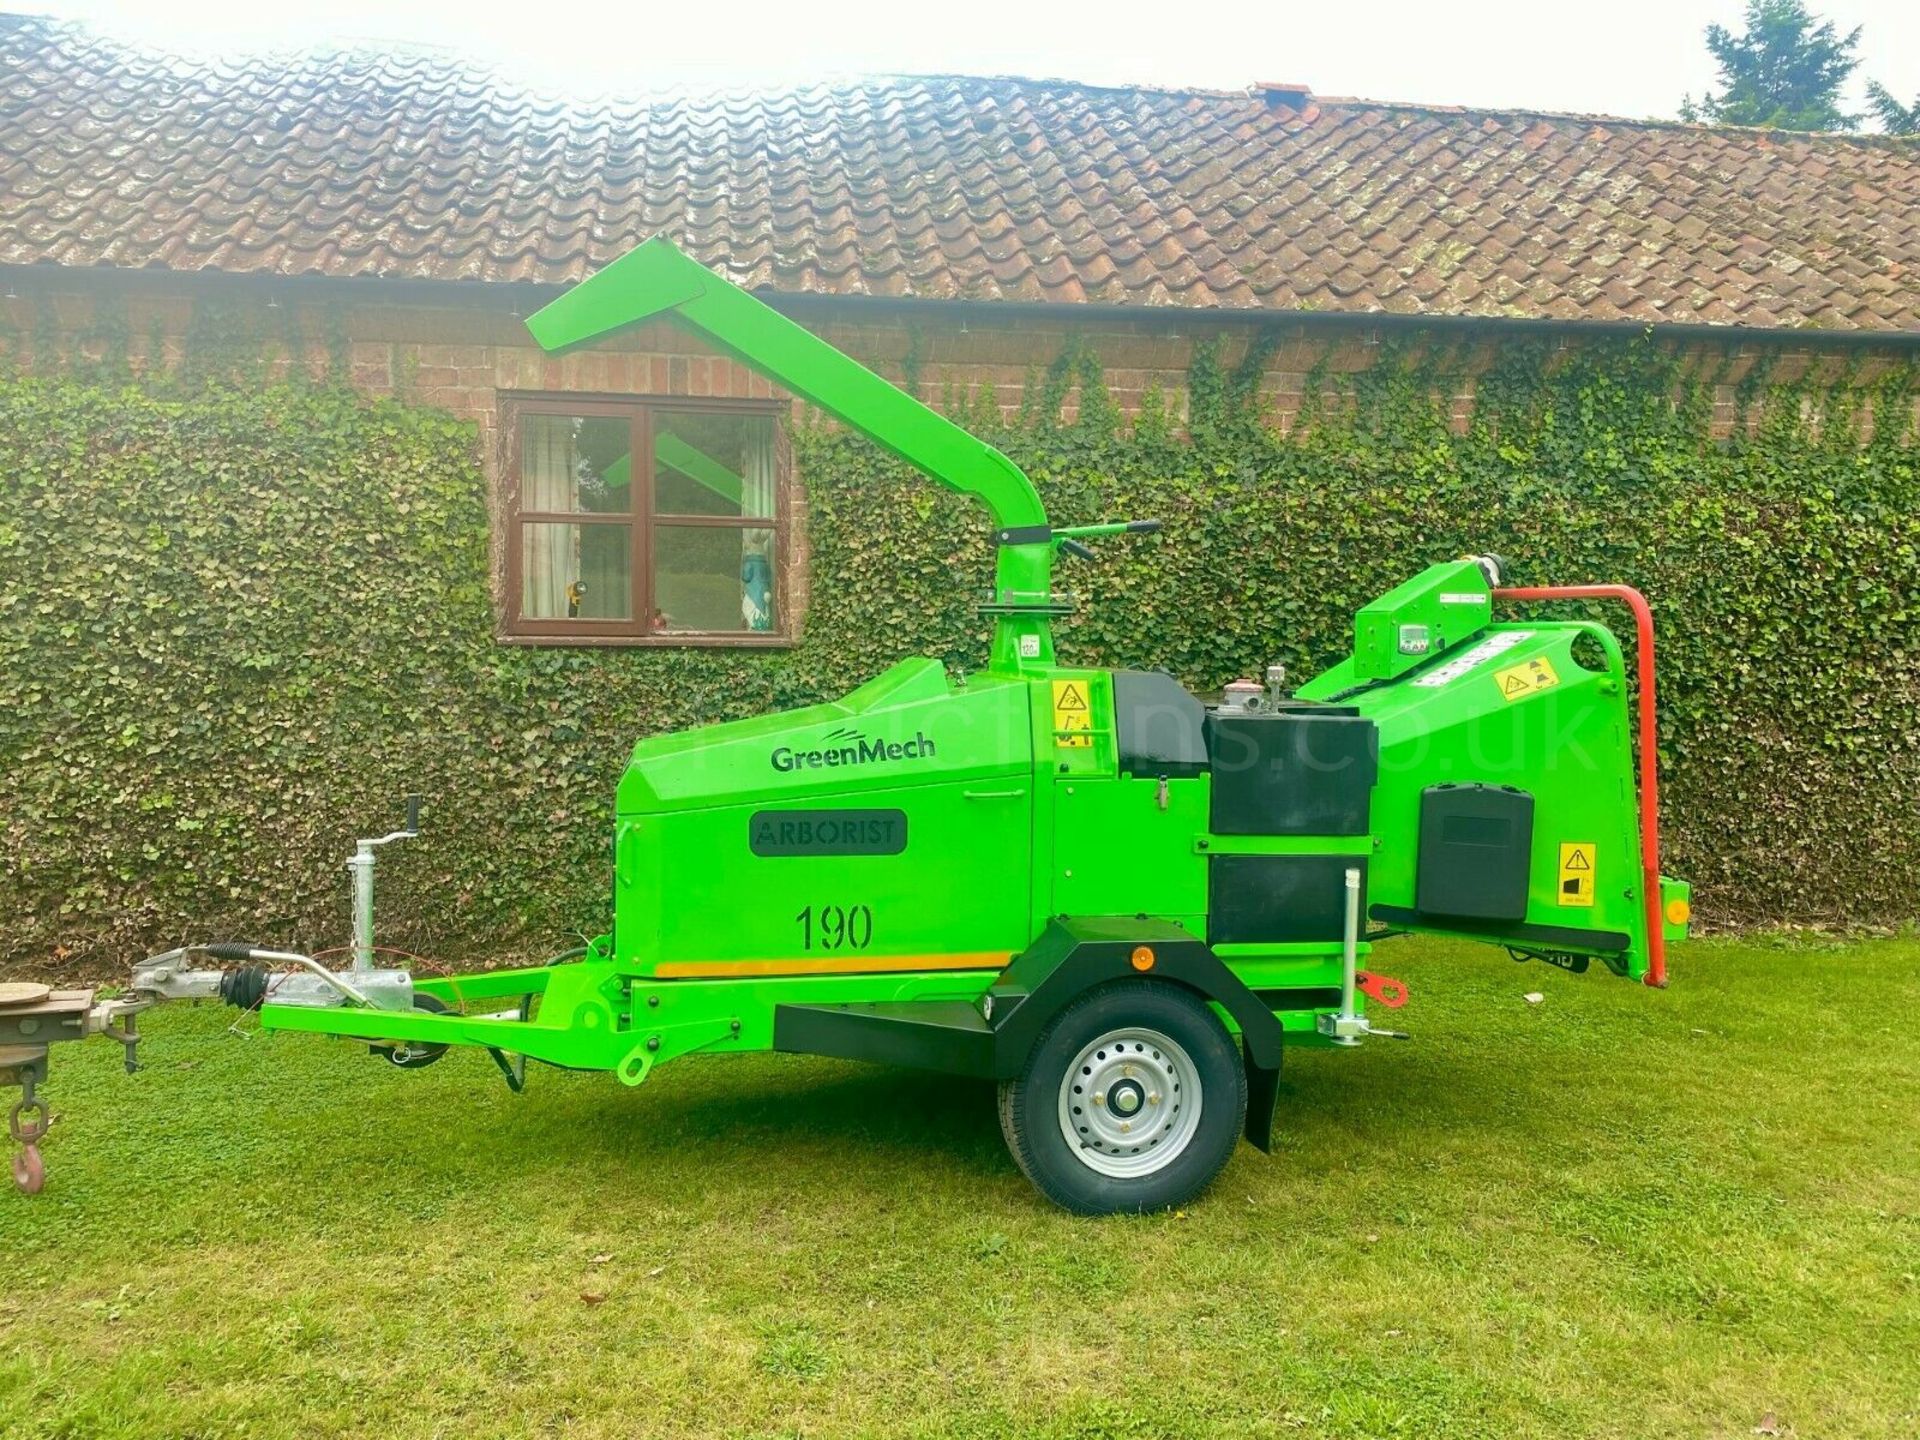 GREENMECH WOODCHIPPER, YEAR 2015, 190MM CHIPPING CAPACITY, ARBORIST 190, ONLY 275 HOURS *PLUS VAT*